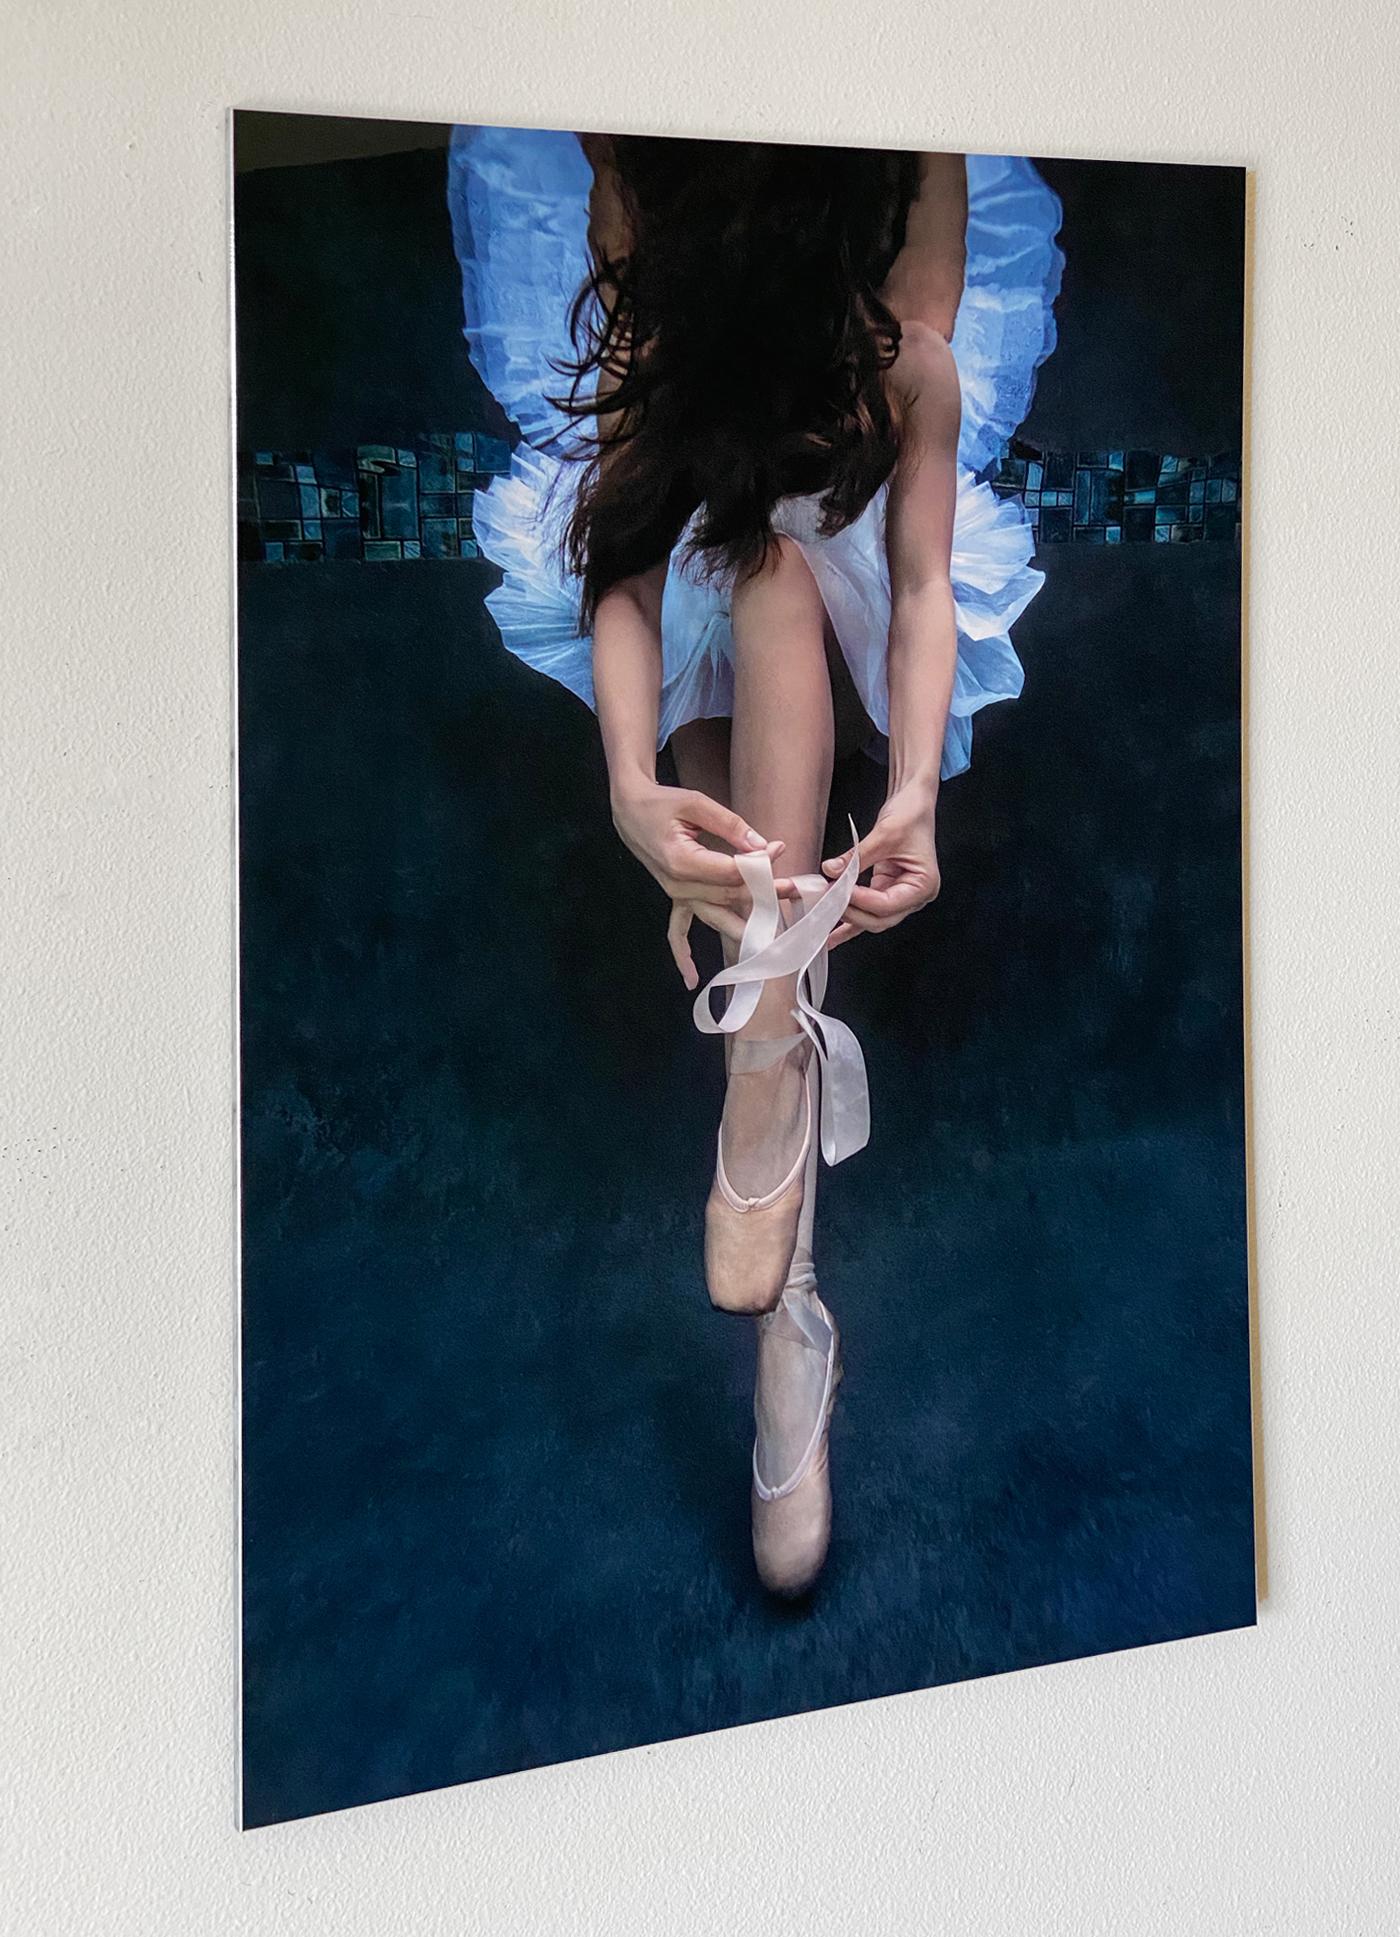 Pointe - underwater photograph - acrylic print - Contemporary Photograph by Alex Sher